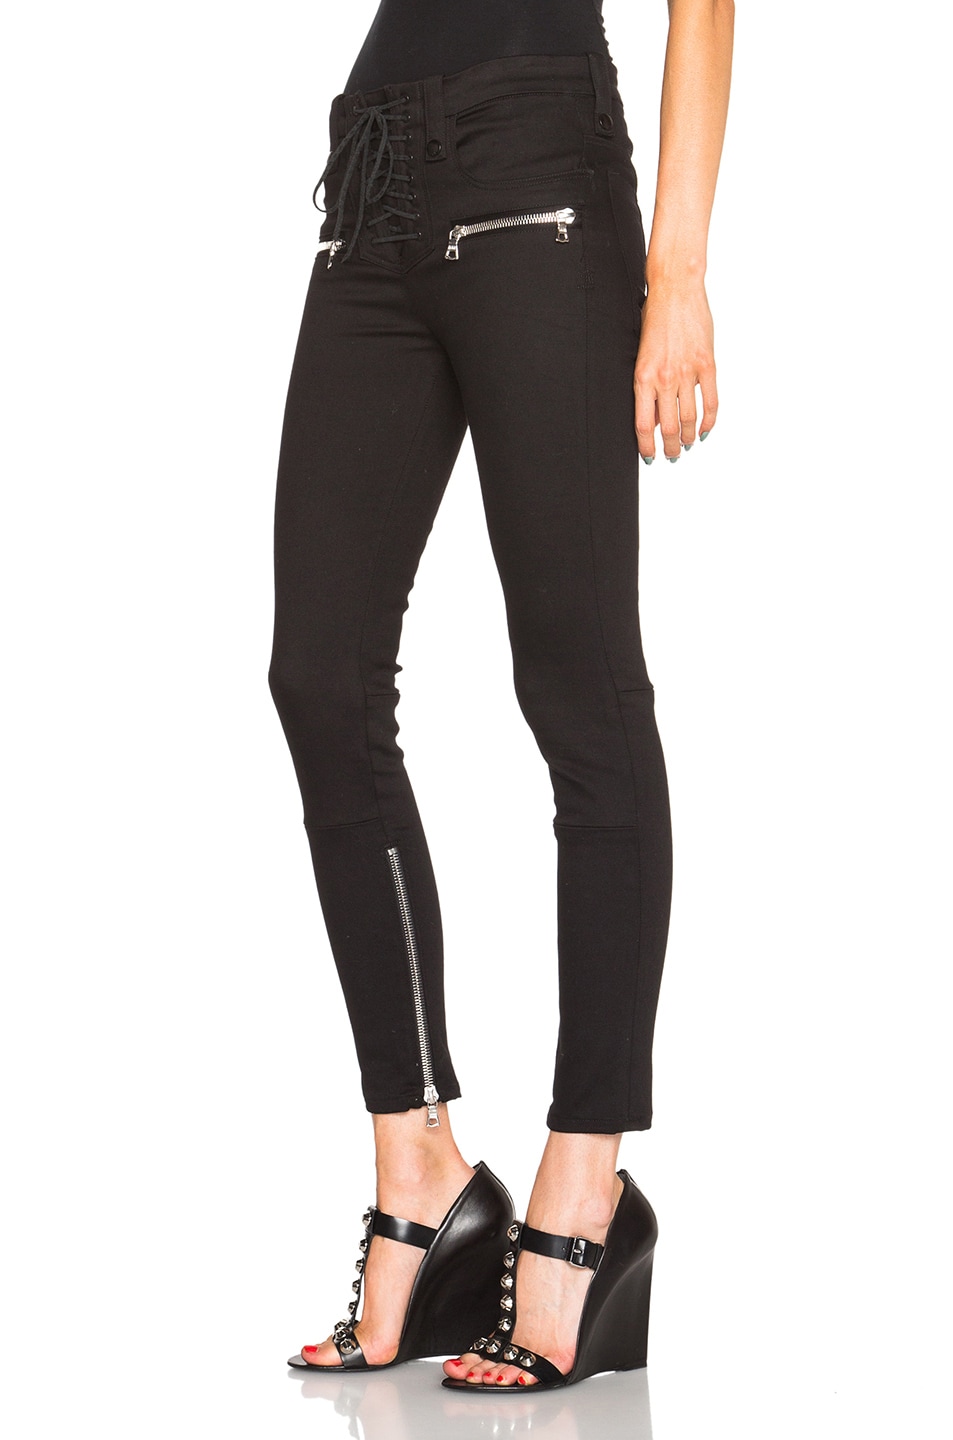 Unravel Lace Up Skinny Pants in Black | FWRD